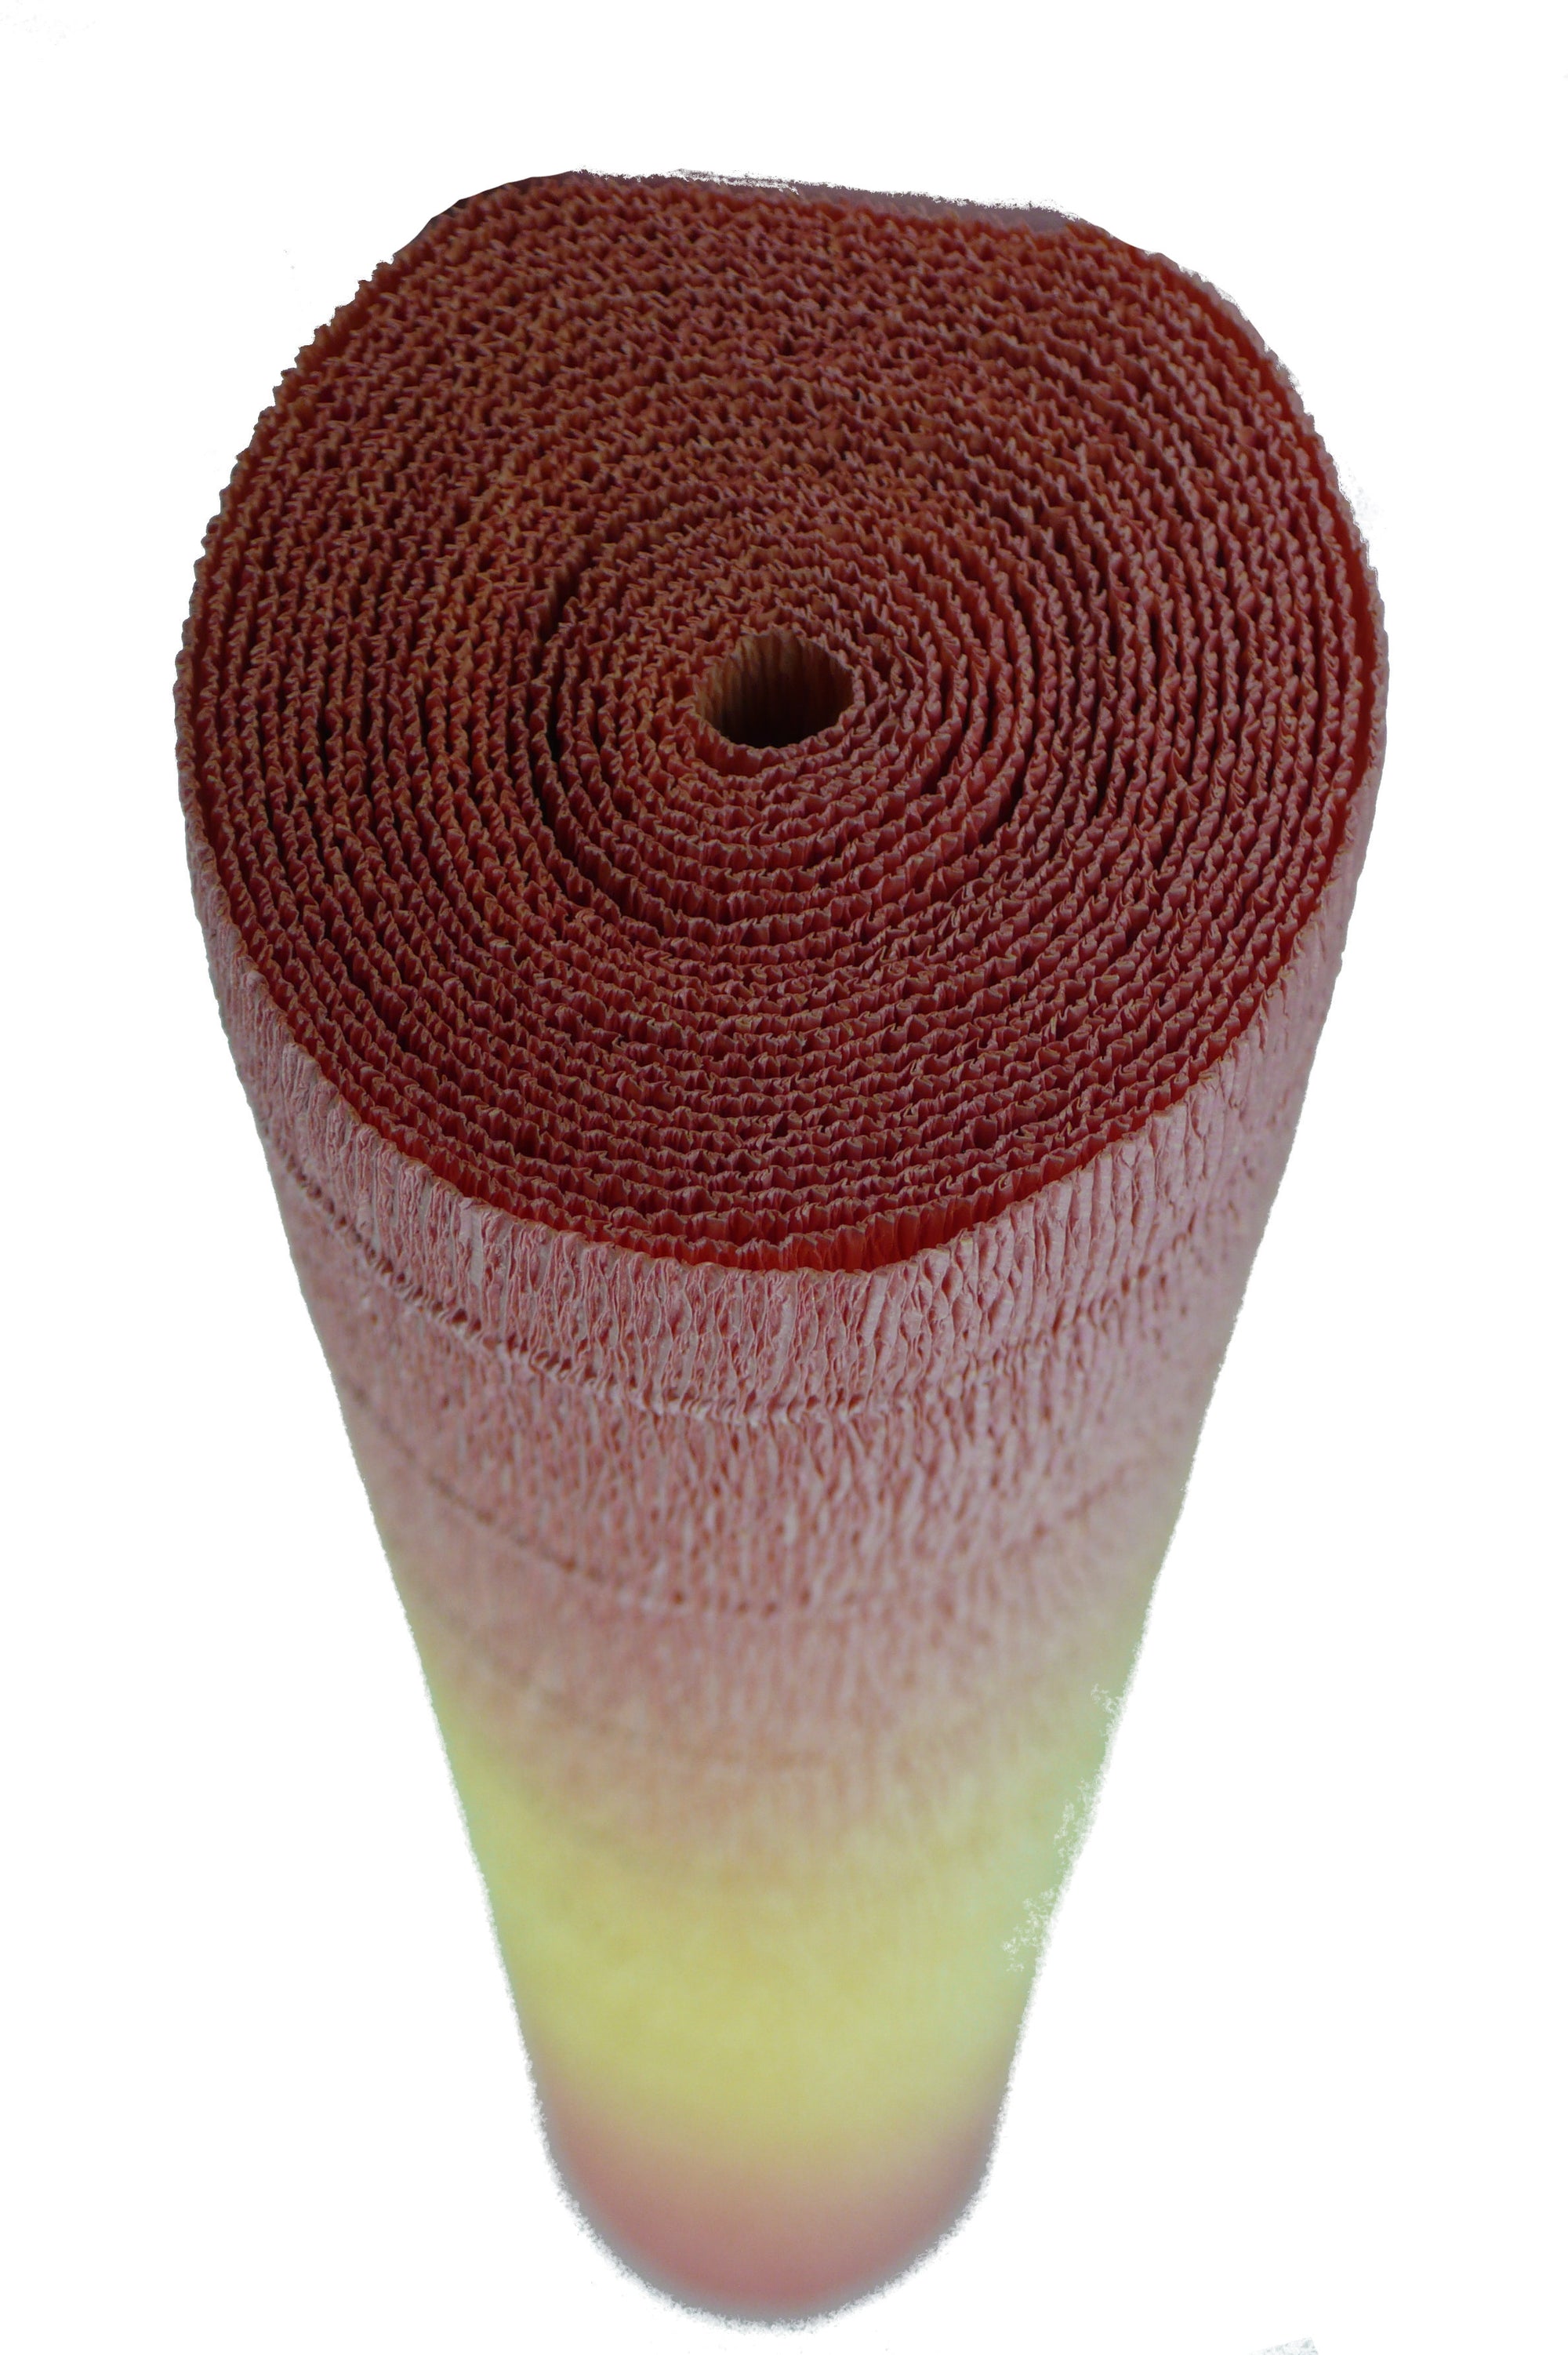 Italian Crepe Paper roll 180 gram - 600/3 ROSE AND PALE YELLOW NUANCE by TIFFANIE TURNER